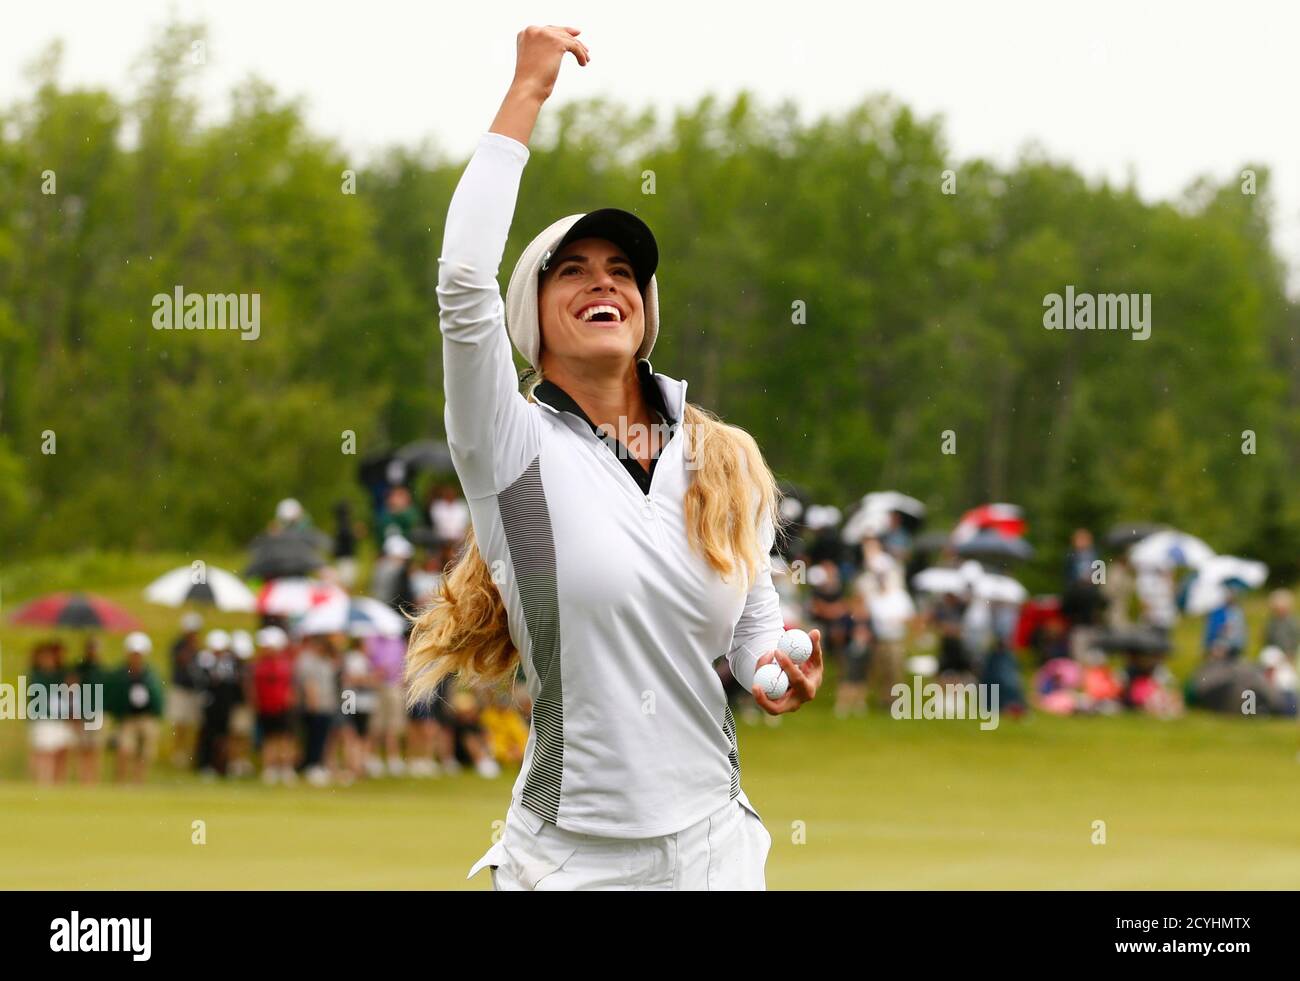 Belen Mozo of Spain throws signed golf balls to the crowd after her final round of the Manulife Financial LPGA Classic women's golf tournament at the Grey Silo course in Waterloo, June 8, 2014.    REUTERS/Mark Blinch (CANADA - Tags: SPORT GOLF) Stock Photo